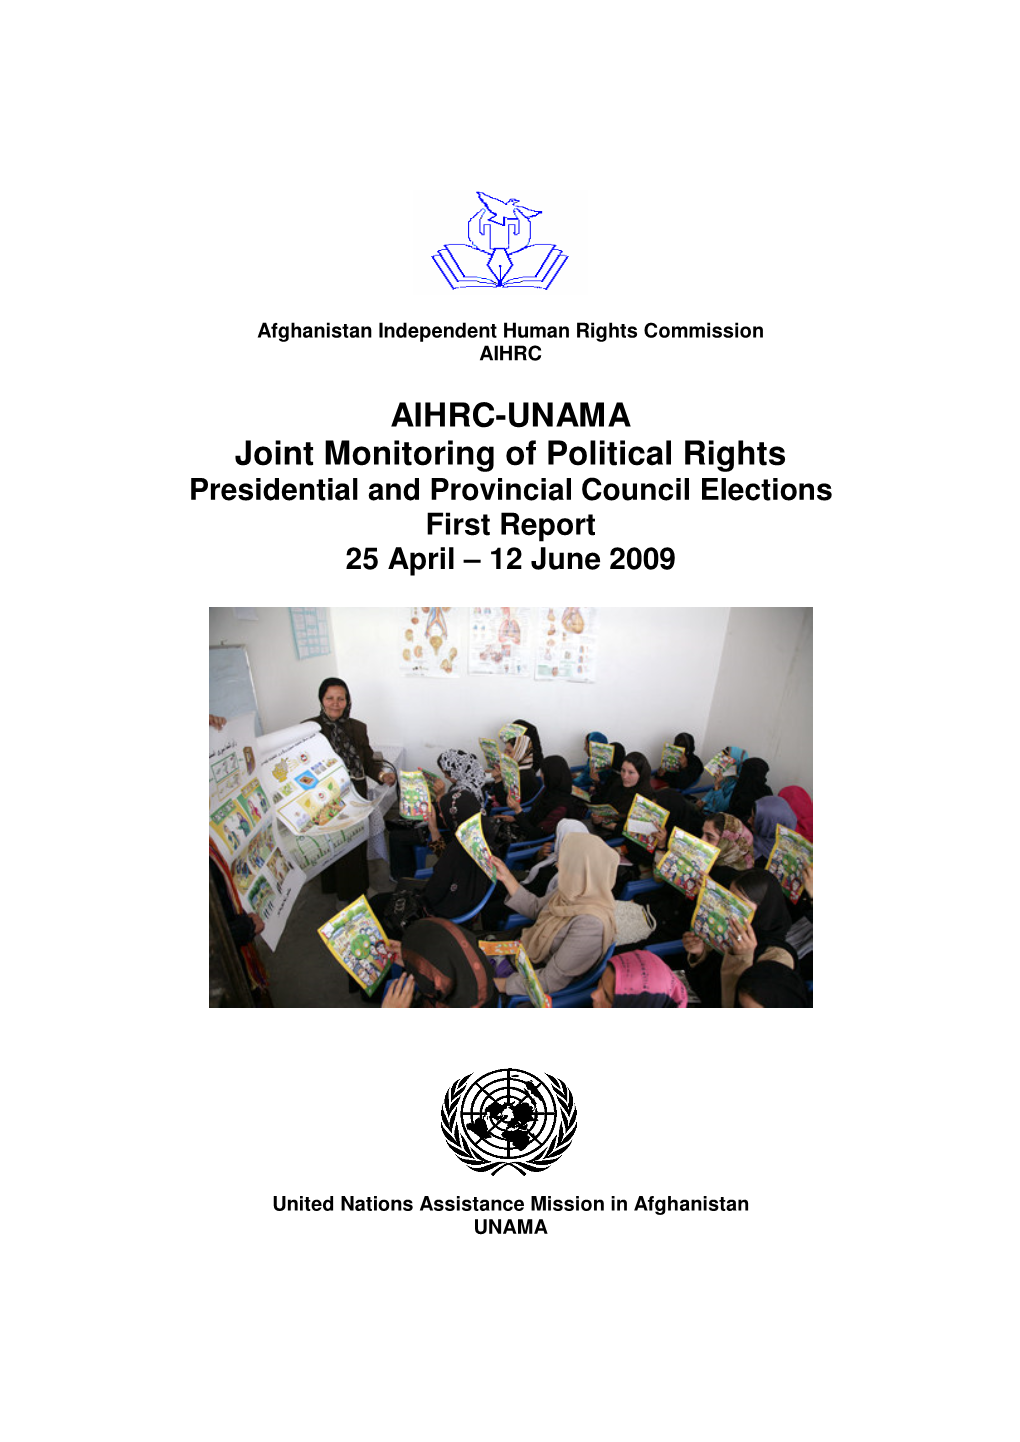 AIHRC-UNAMA Joint Monitoring of Political Rights Presidential and Provincial Council Elections First Report 25 April – 12 June 2009